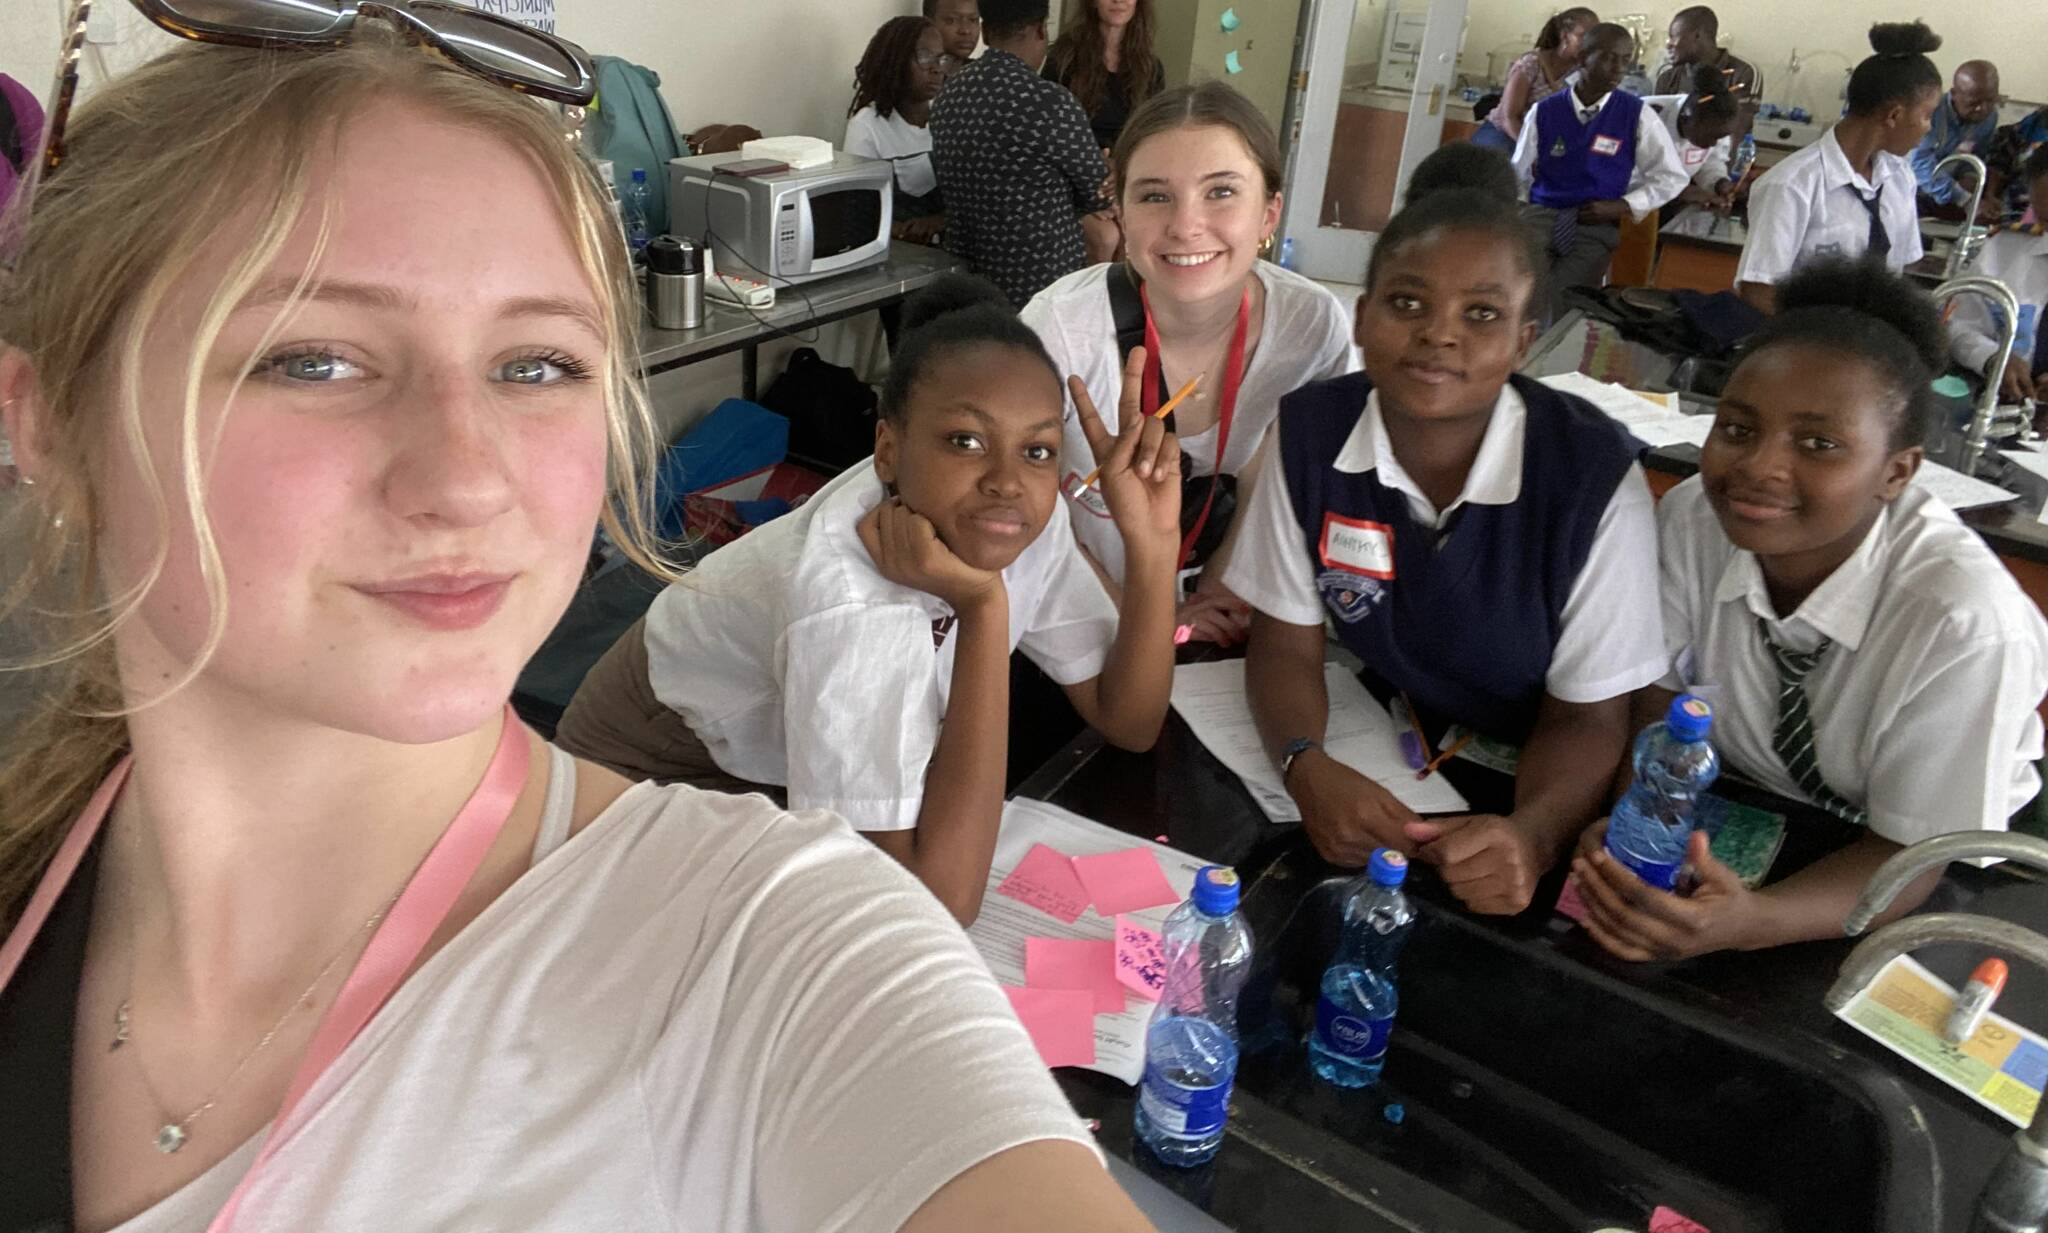 Courtesy photo
Kora Murphy takes a picture with classroom friends during the Girls to Girls trip to Kenya.